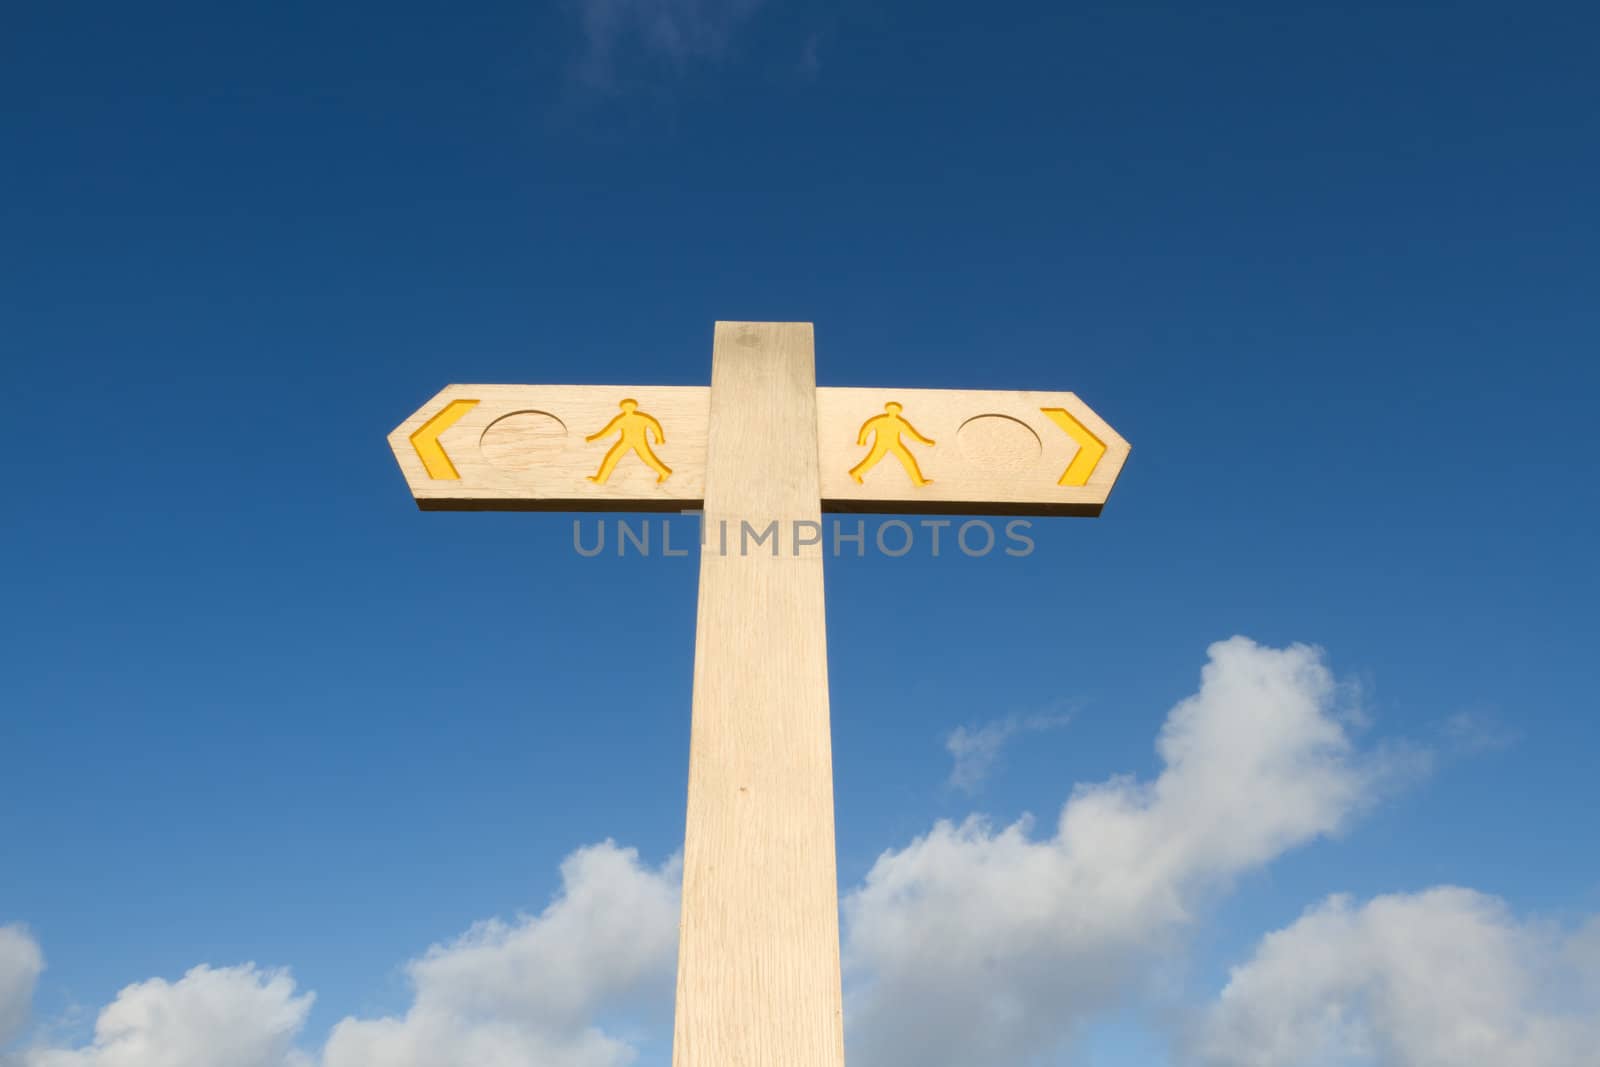 A wooden post with dual direction arrows and figures of people coloured in yellow against a brilliant blue sky with white cloud.